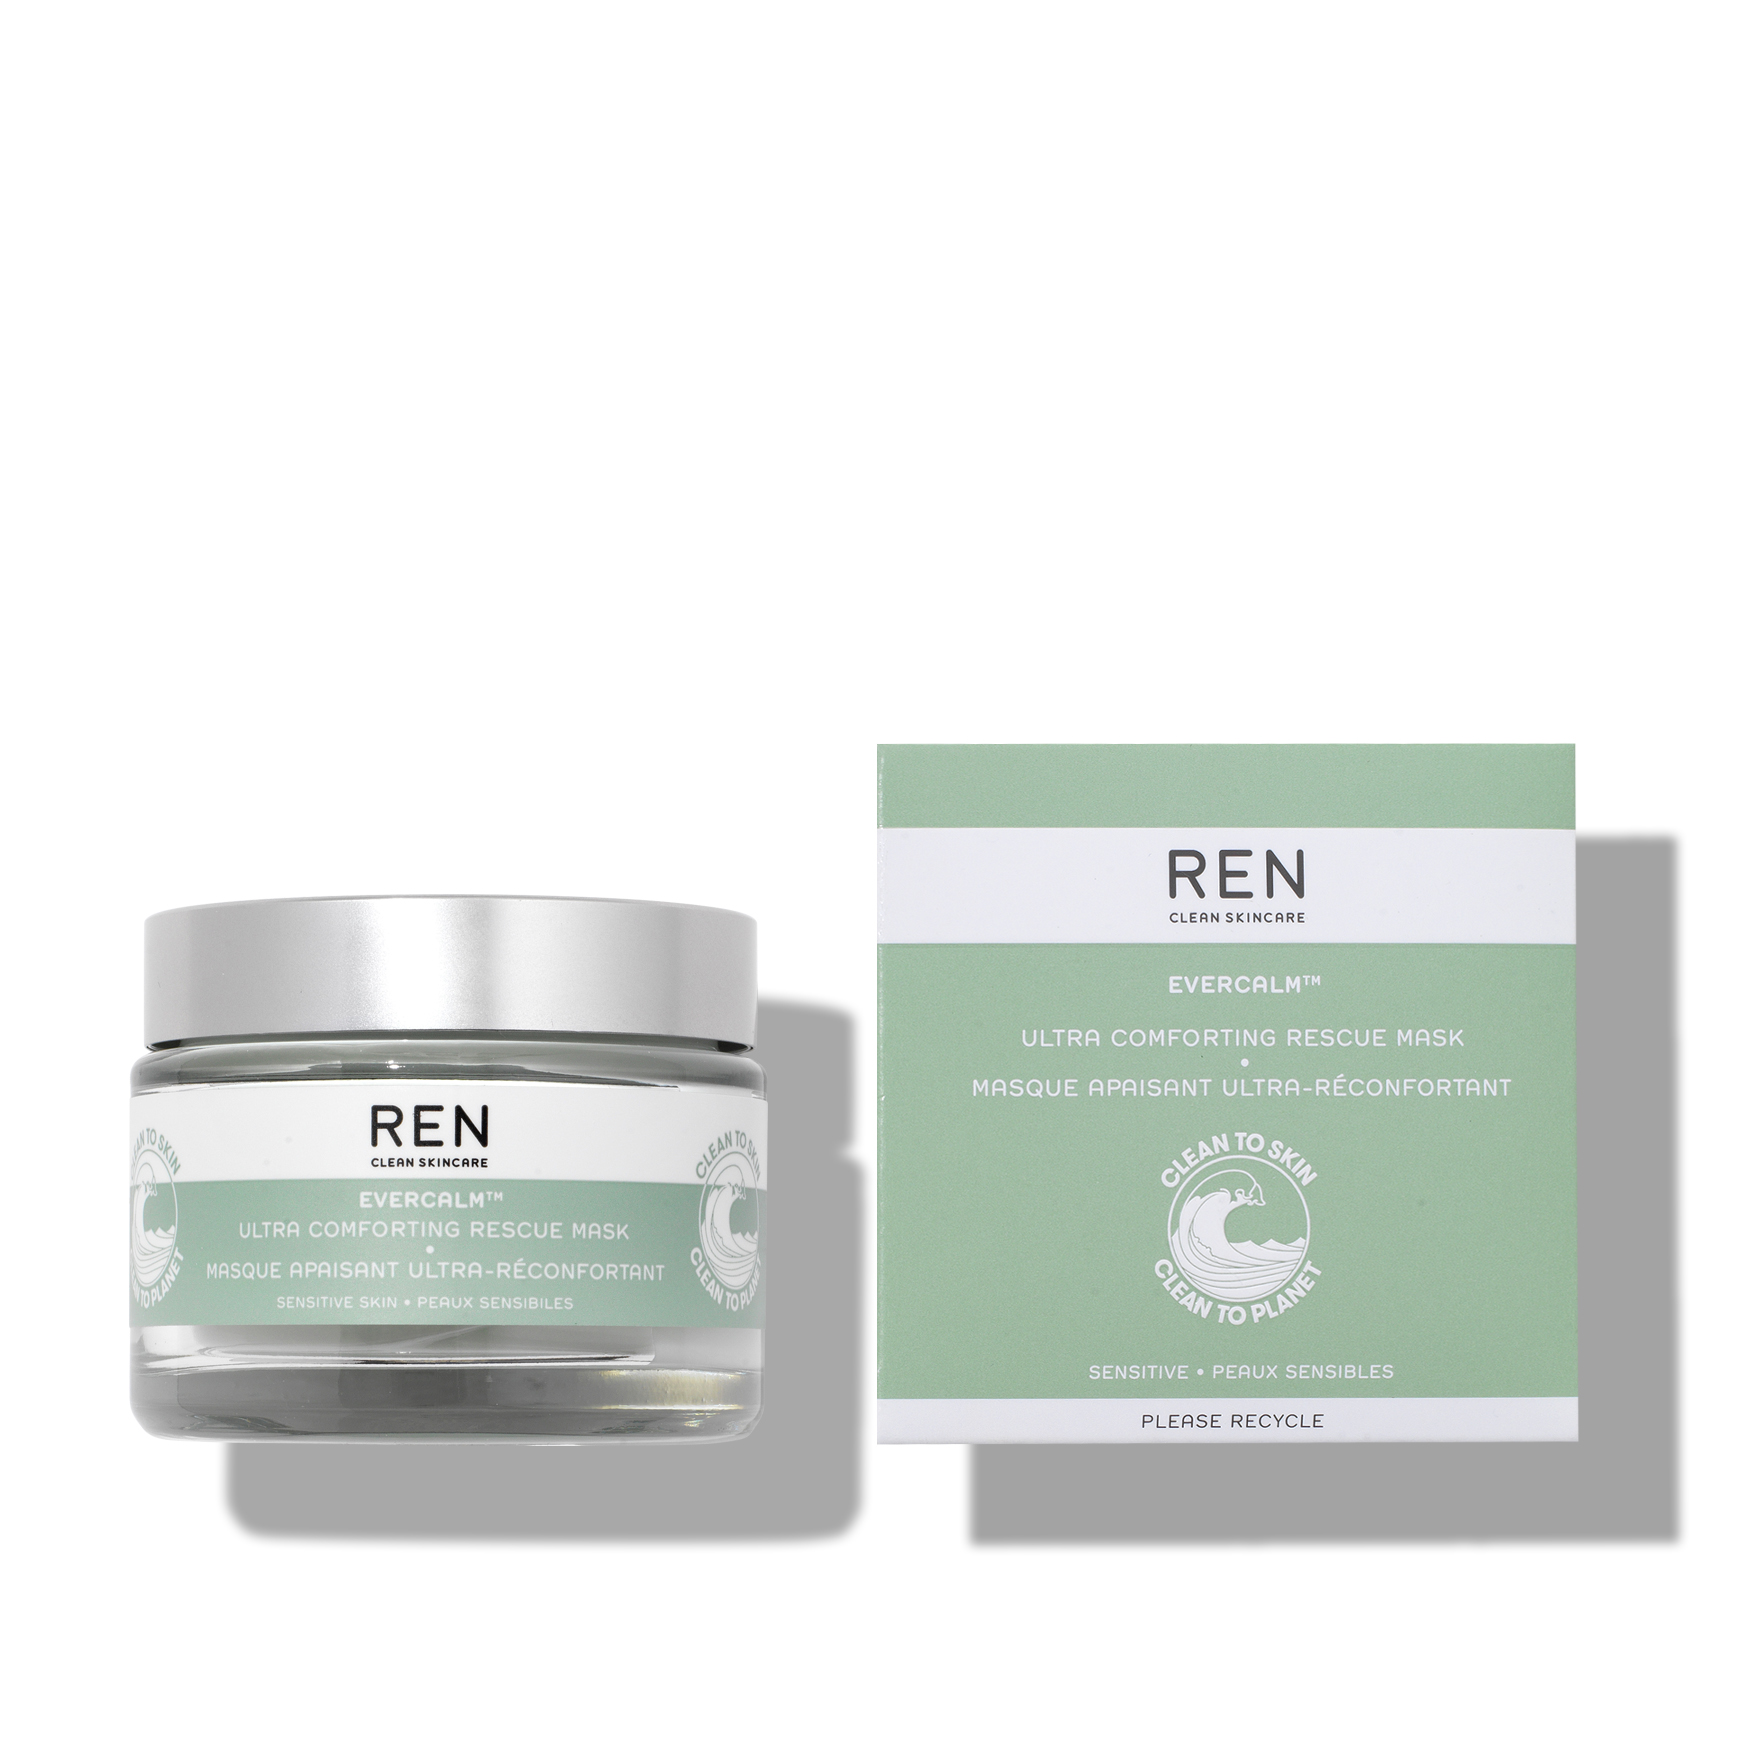 Ren Clean Skincare Evercalm Ultra Comforting Rescue Mask | Space NK